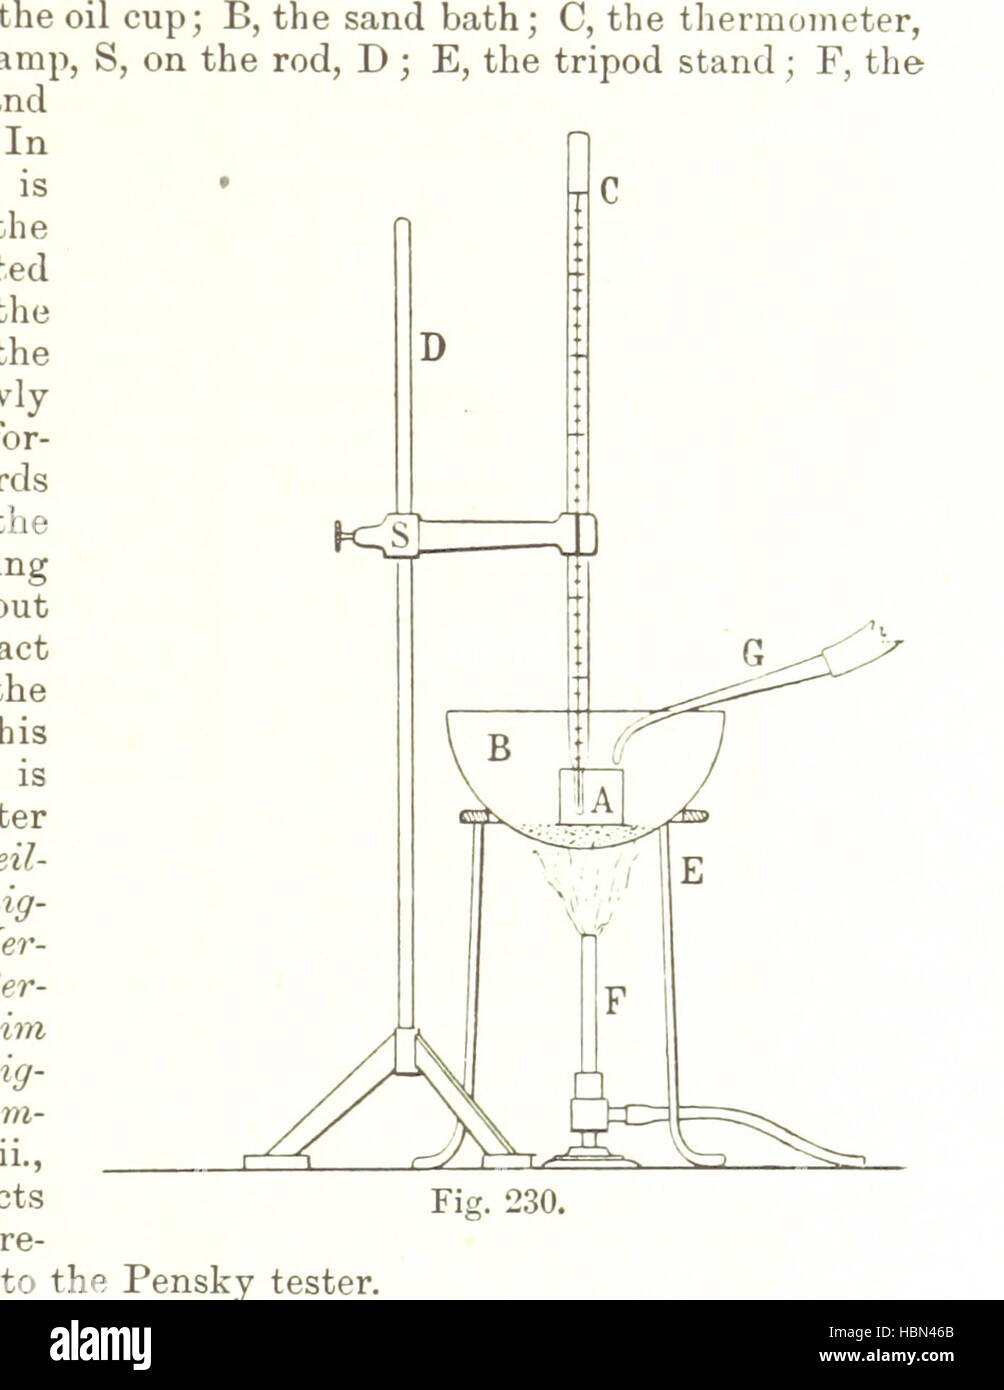 Image taken from page 213 of 'Petroleum: a treatise on the geographical distribution and geological occurrence of petroleum and natural gas ... By B. Redwood, assisted by G. T. Holloway, and other contributors ... With maps, etc' Image taken from page 213 of 'Petroleum a treatise on Stock Photo